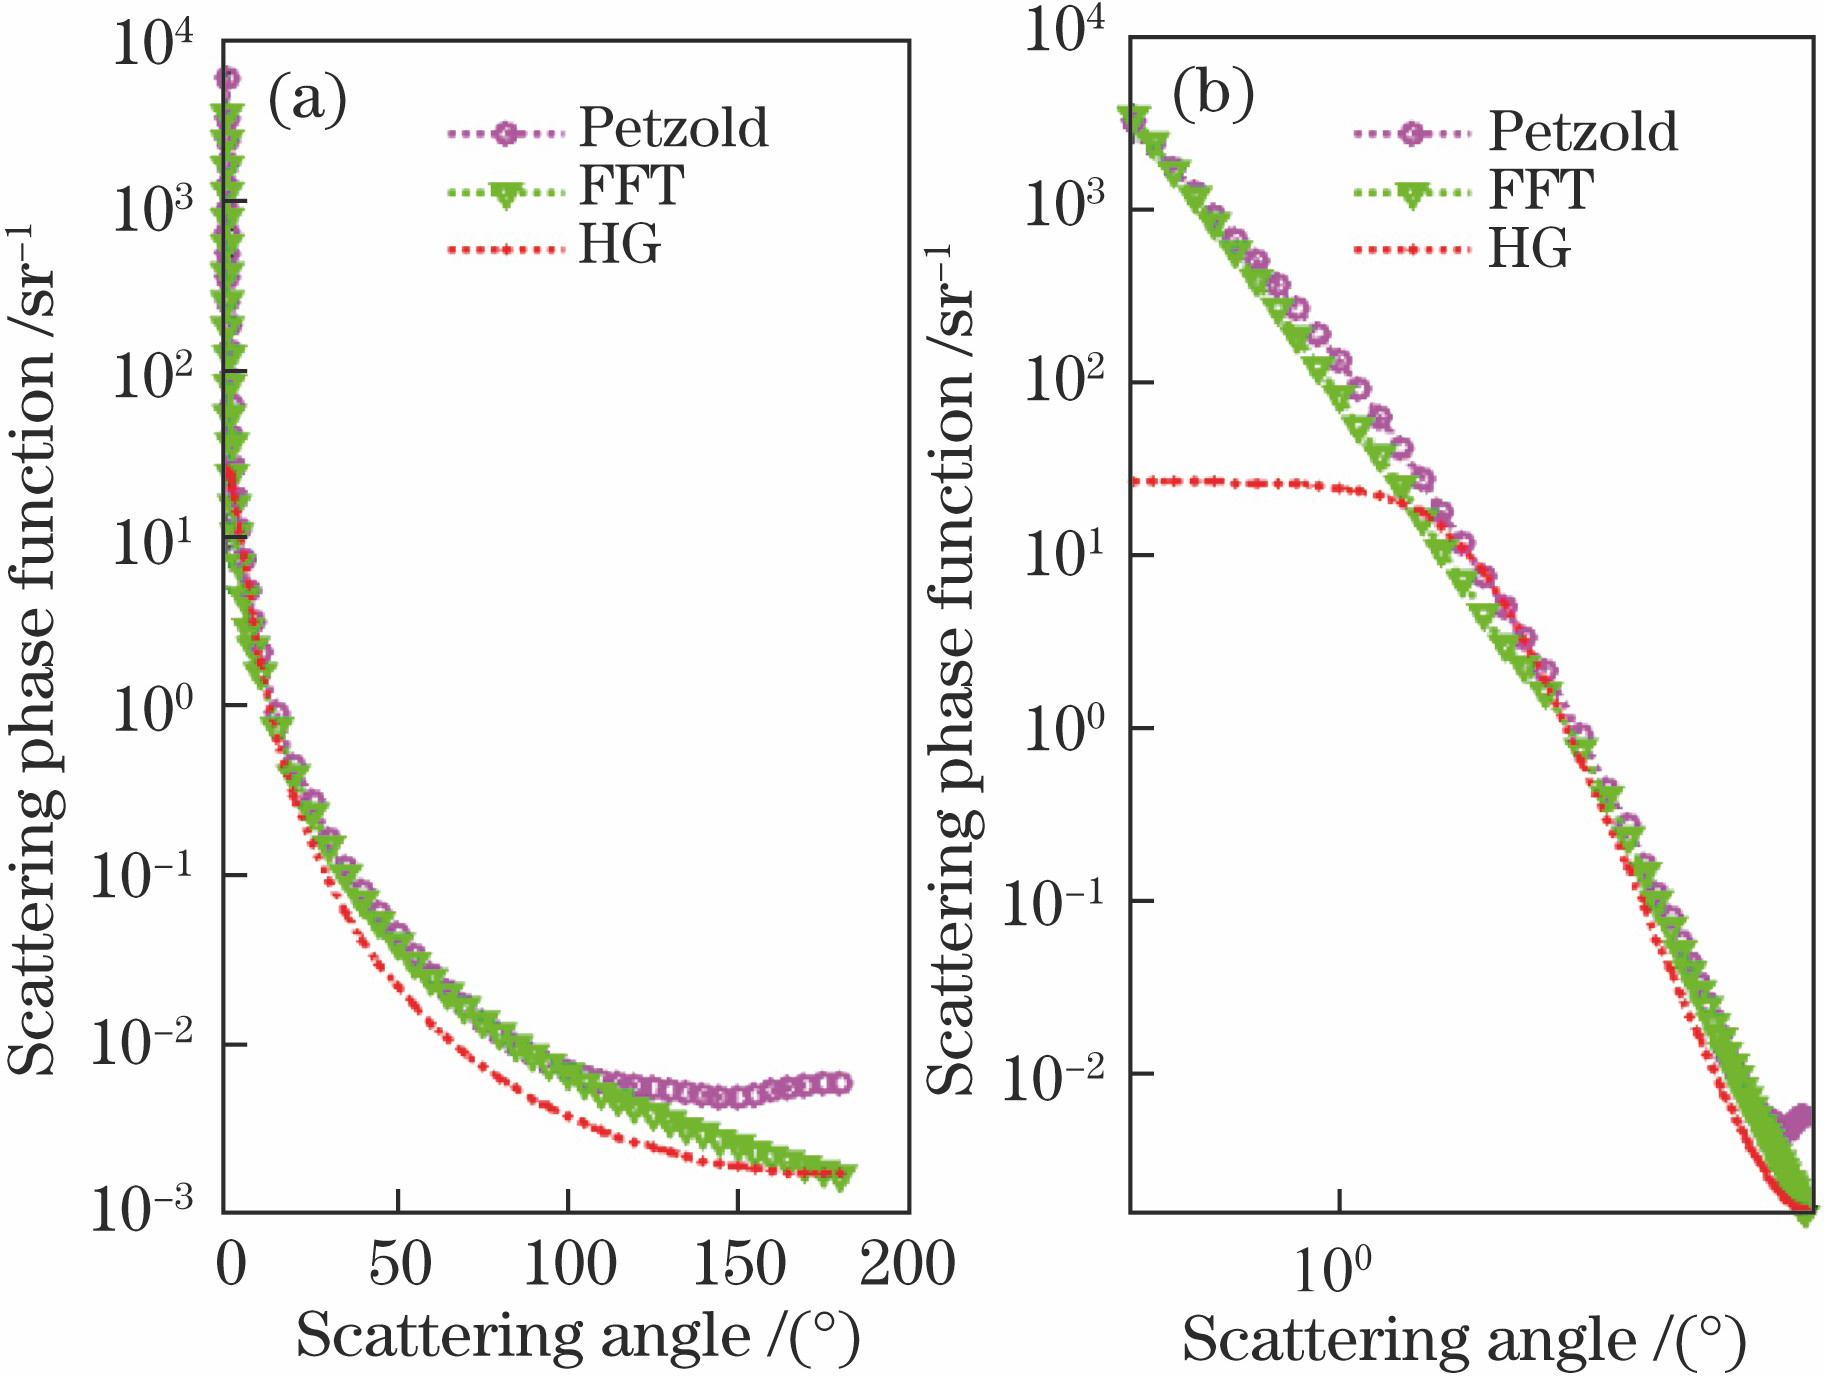 Comparison of different scattering phase functions with Petzold average particle phase function. (a) Semi-logarithmic coordinates; (b) double logarithmic coordinates